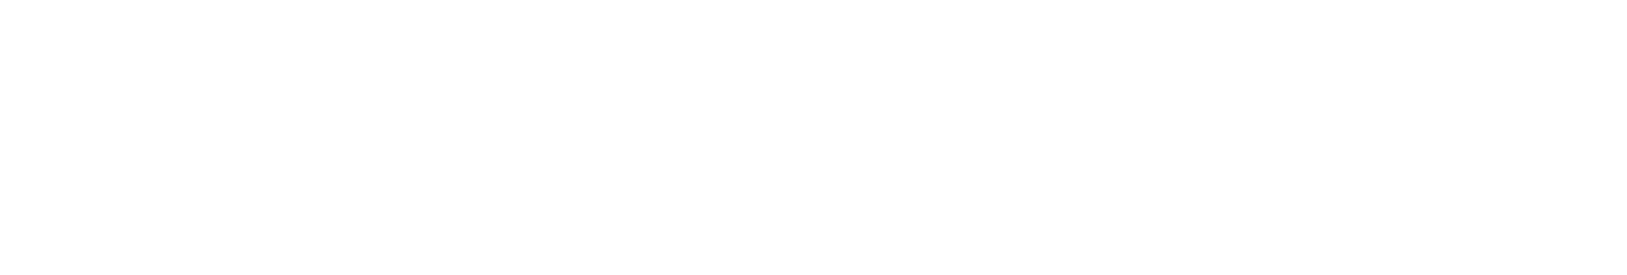 University of Exeter - Global Systems Institute logo